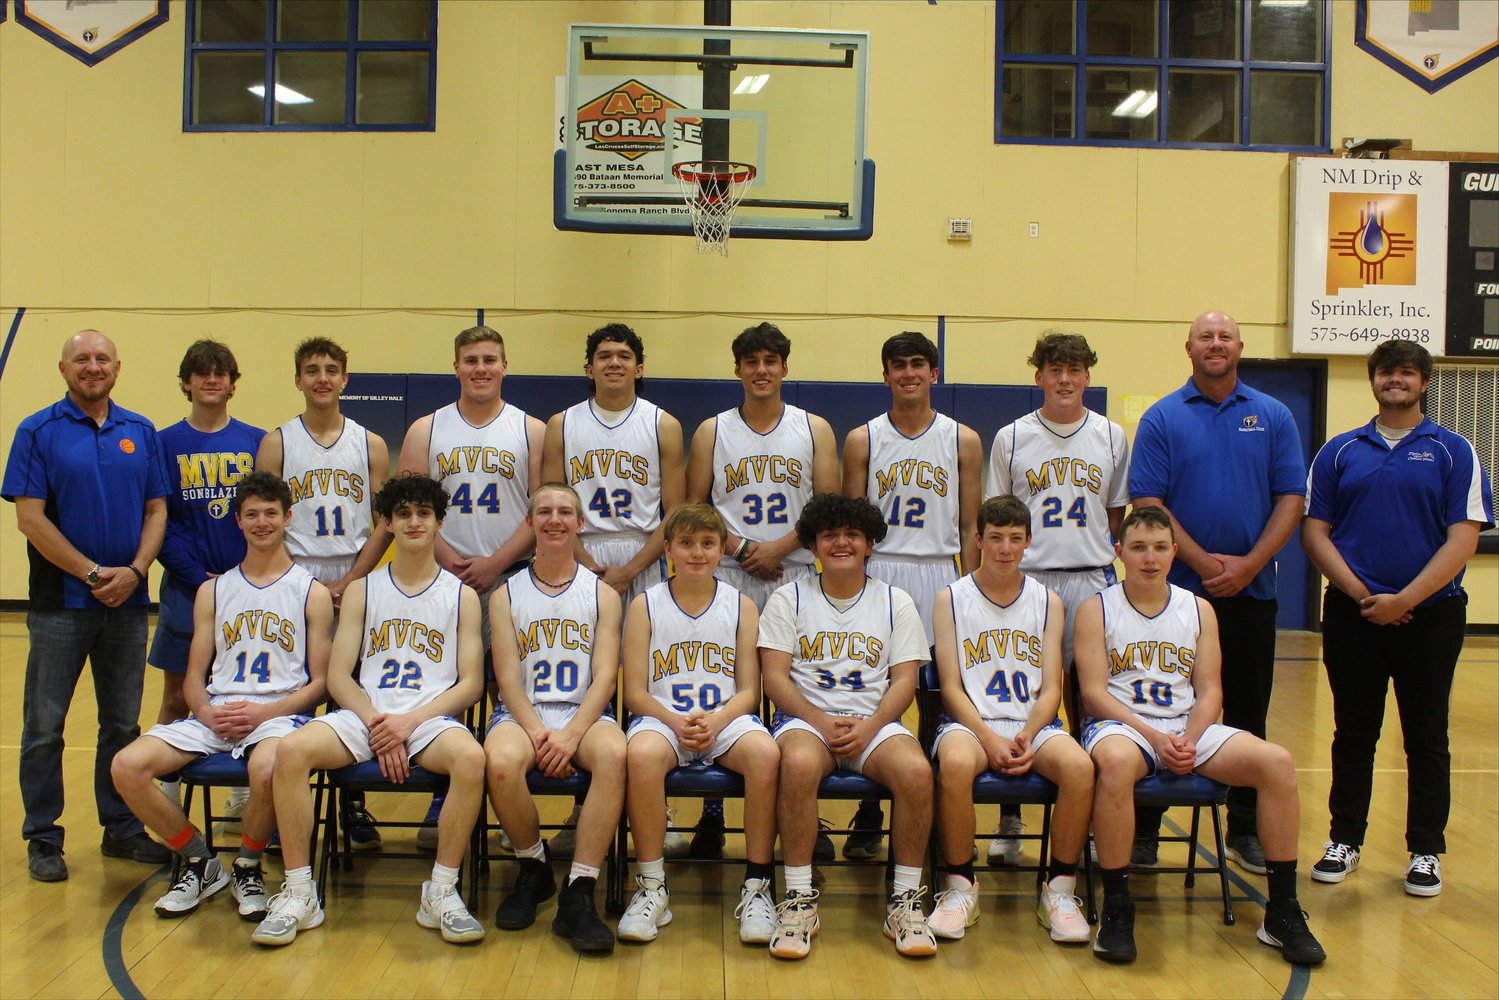 The Mesilla Valley Christian boys basketball team made it to the final four of the state 1A playoffs this year.